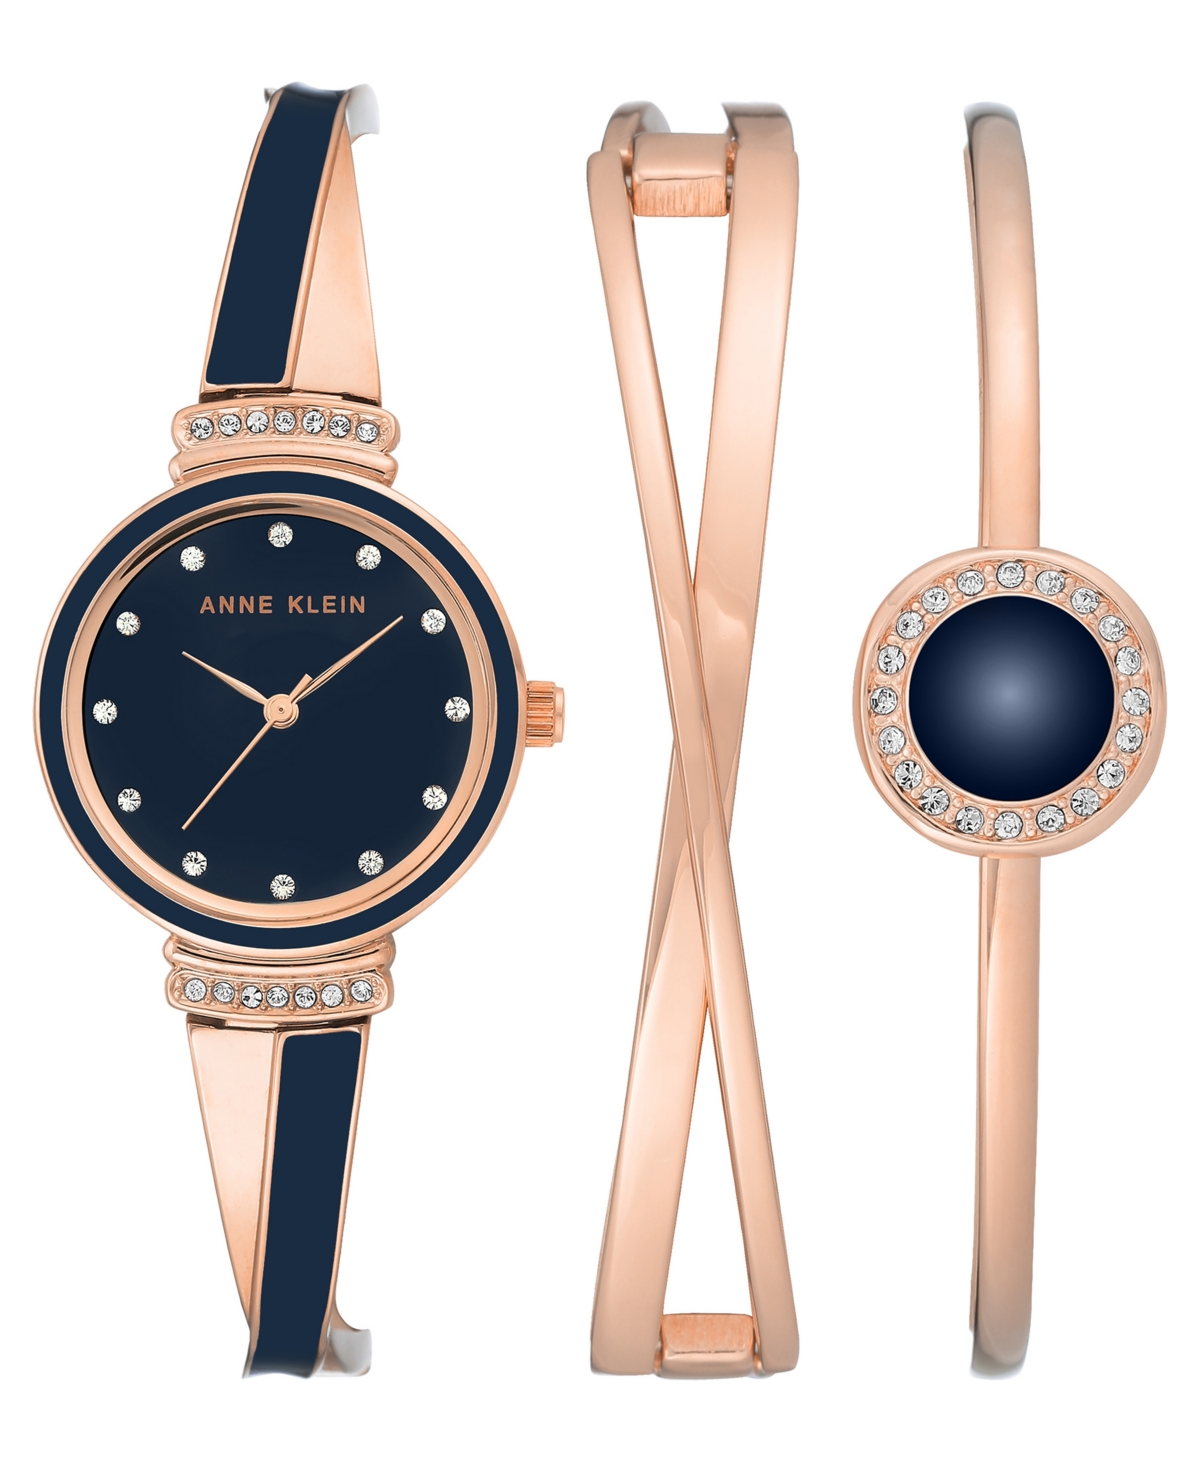 Anne Klein Women's Rose Gold-tone Alloy Bangle With Navy Enamel And Crystal Accents Fashion Watch 33mm Set 3 Pi In Rose Gold-tone,navy